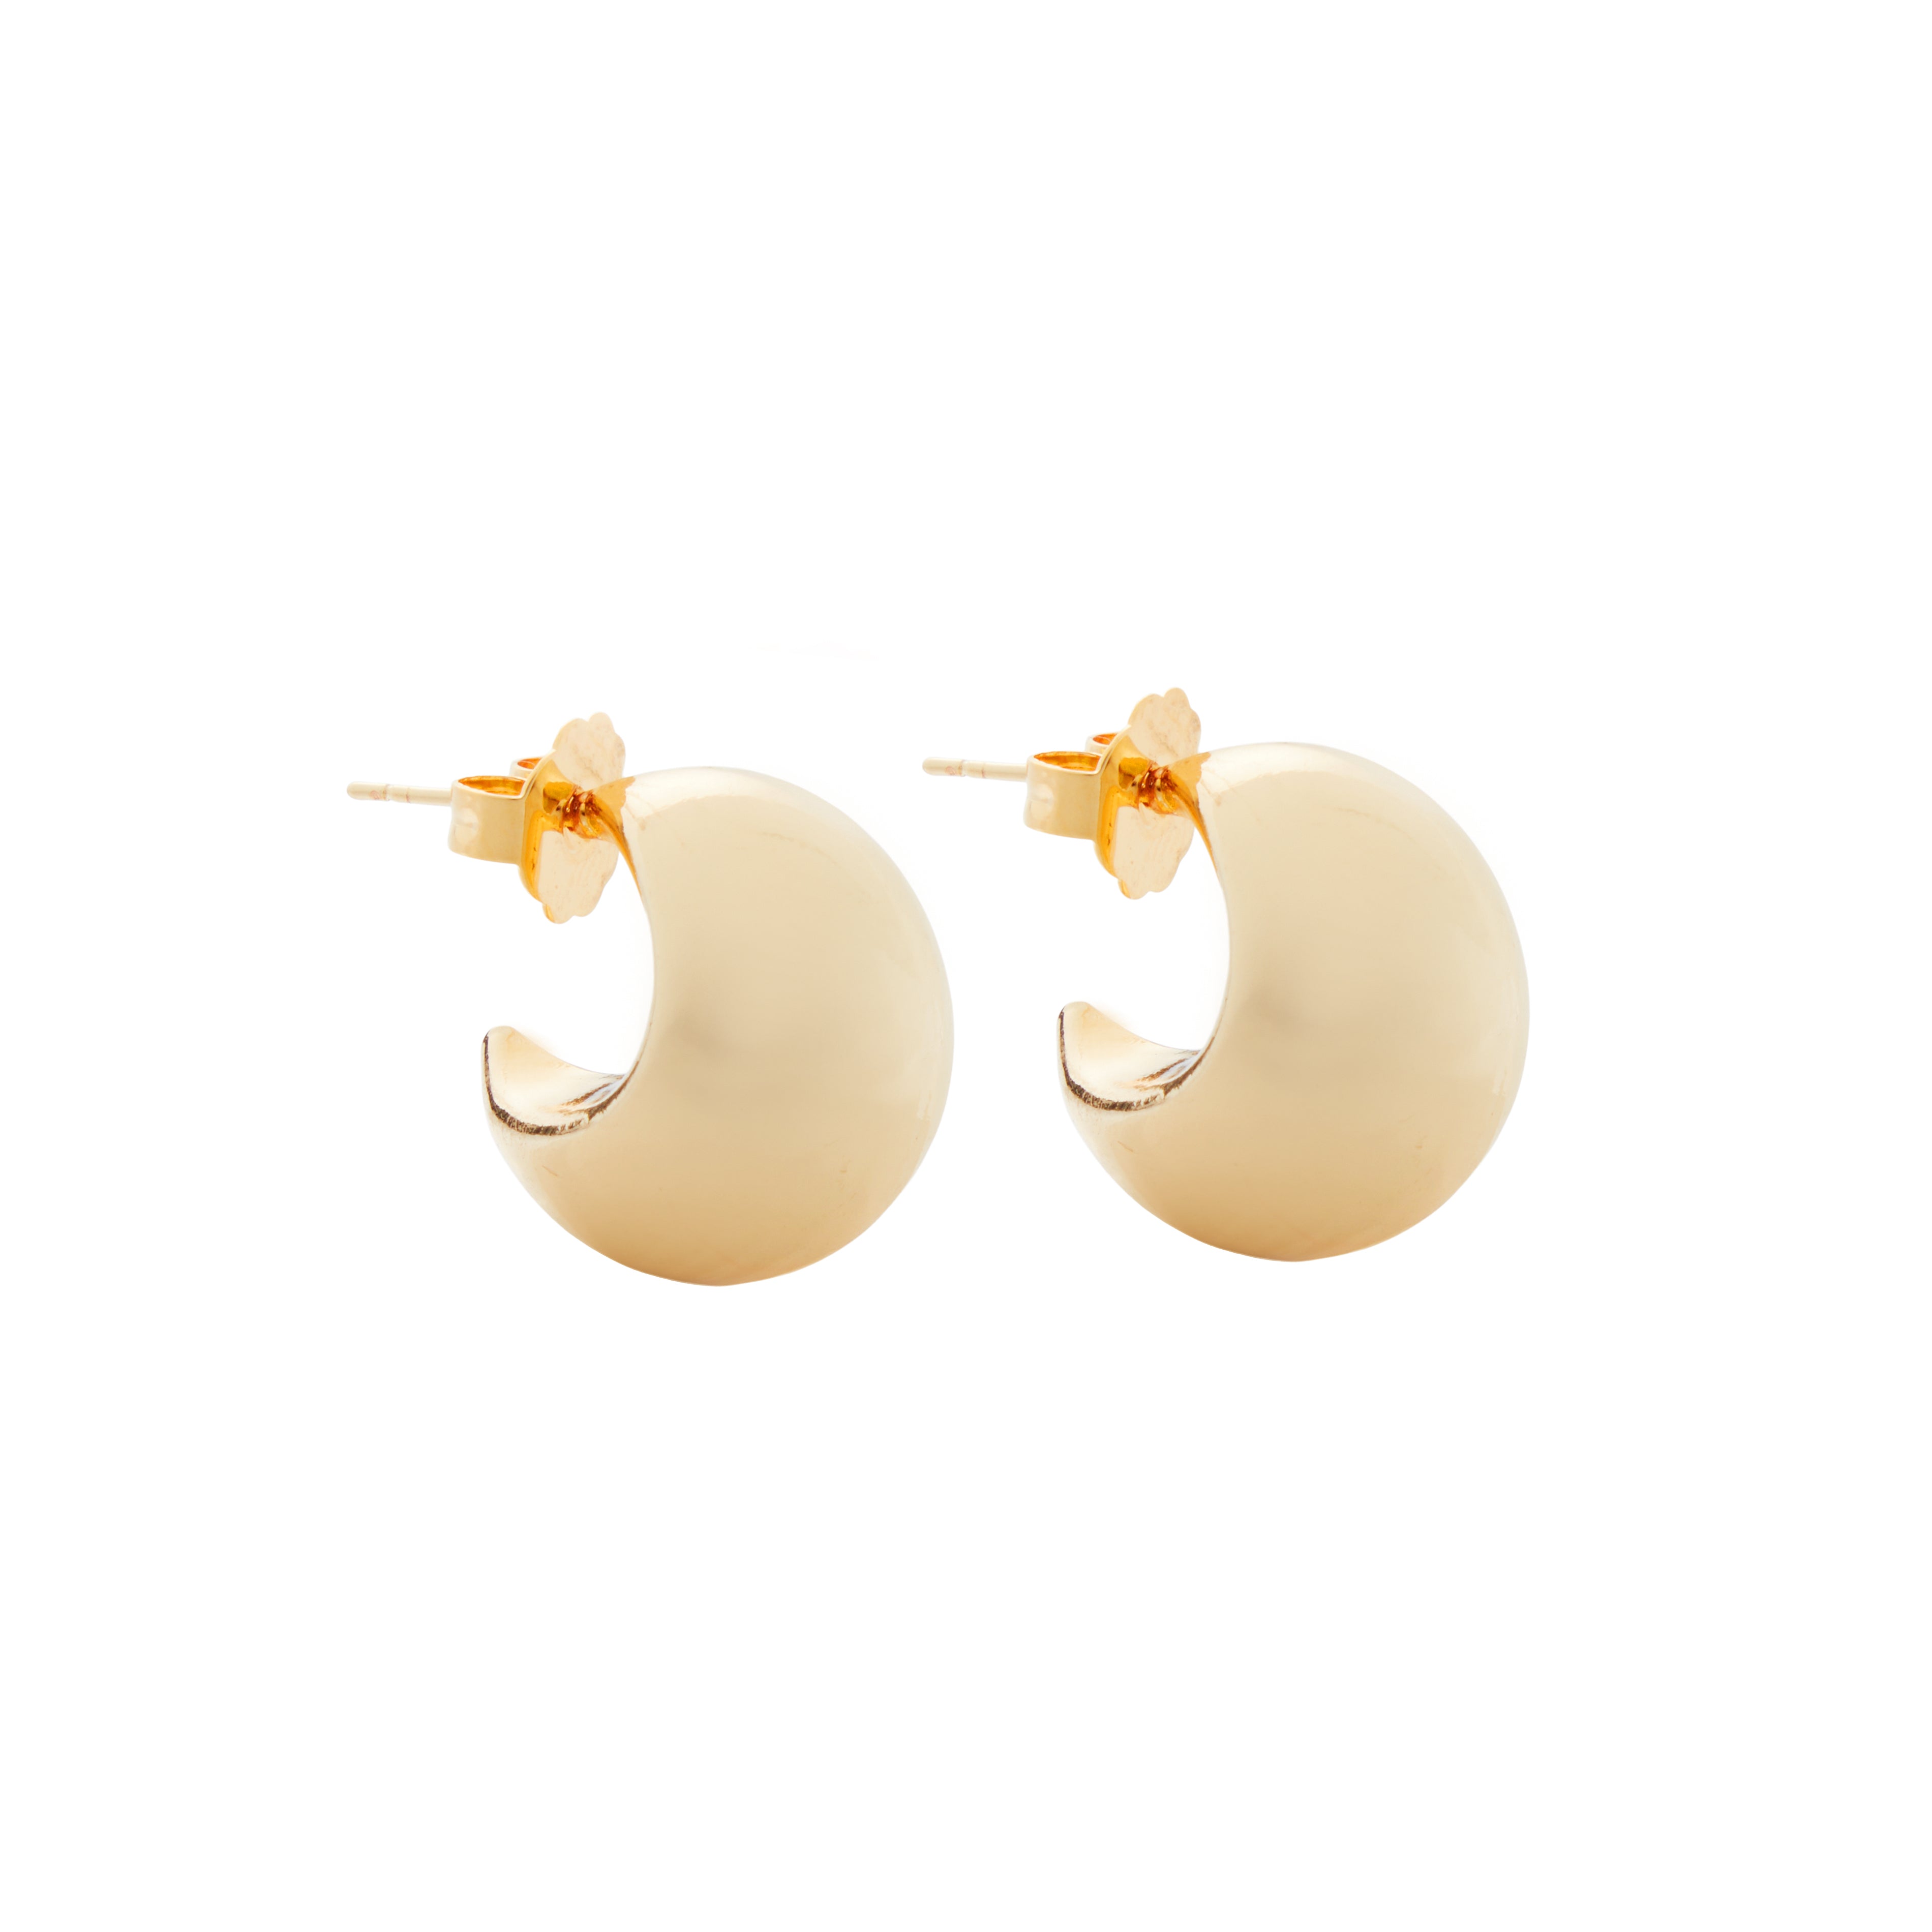 Why Stud Earrings for Women Are A Great Gift